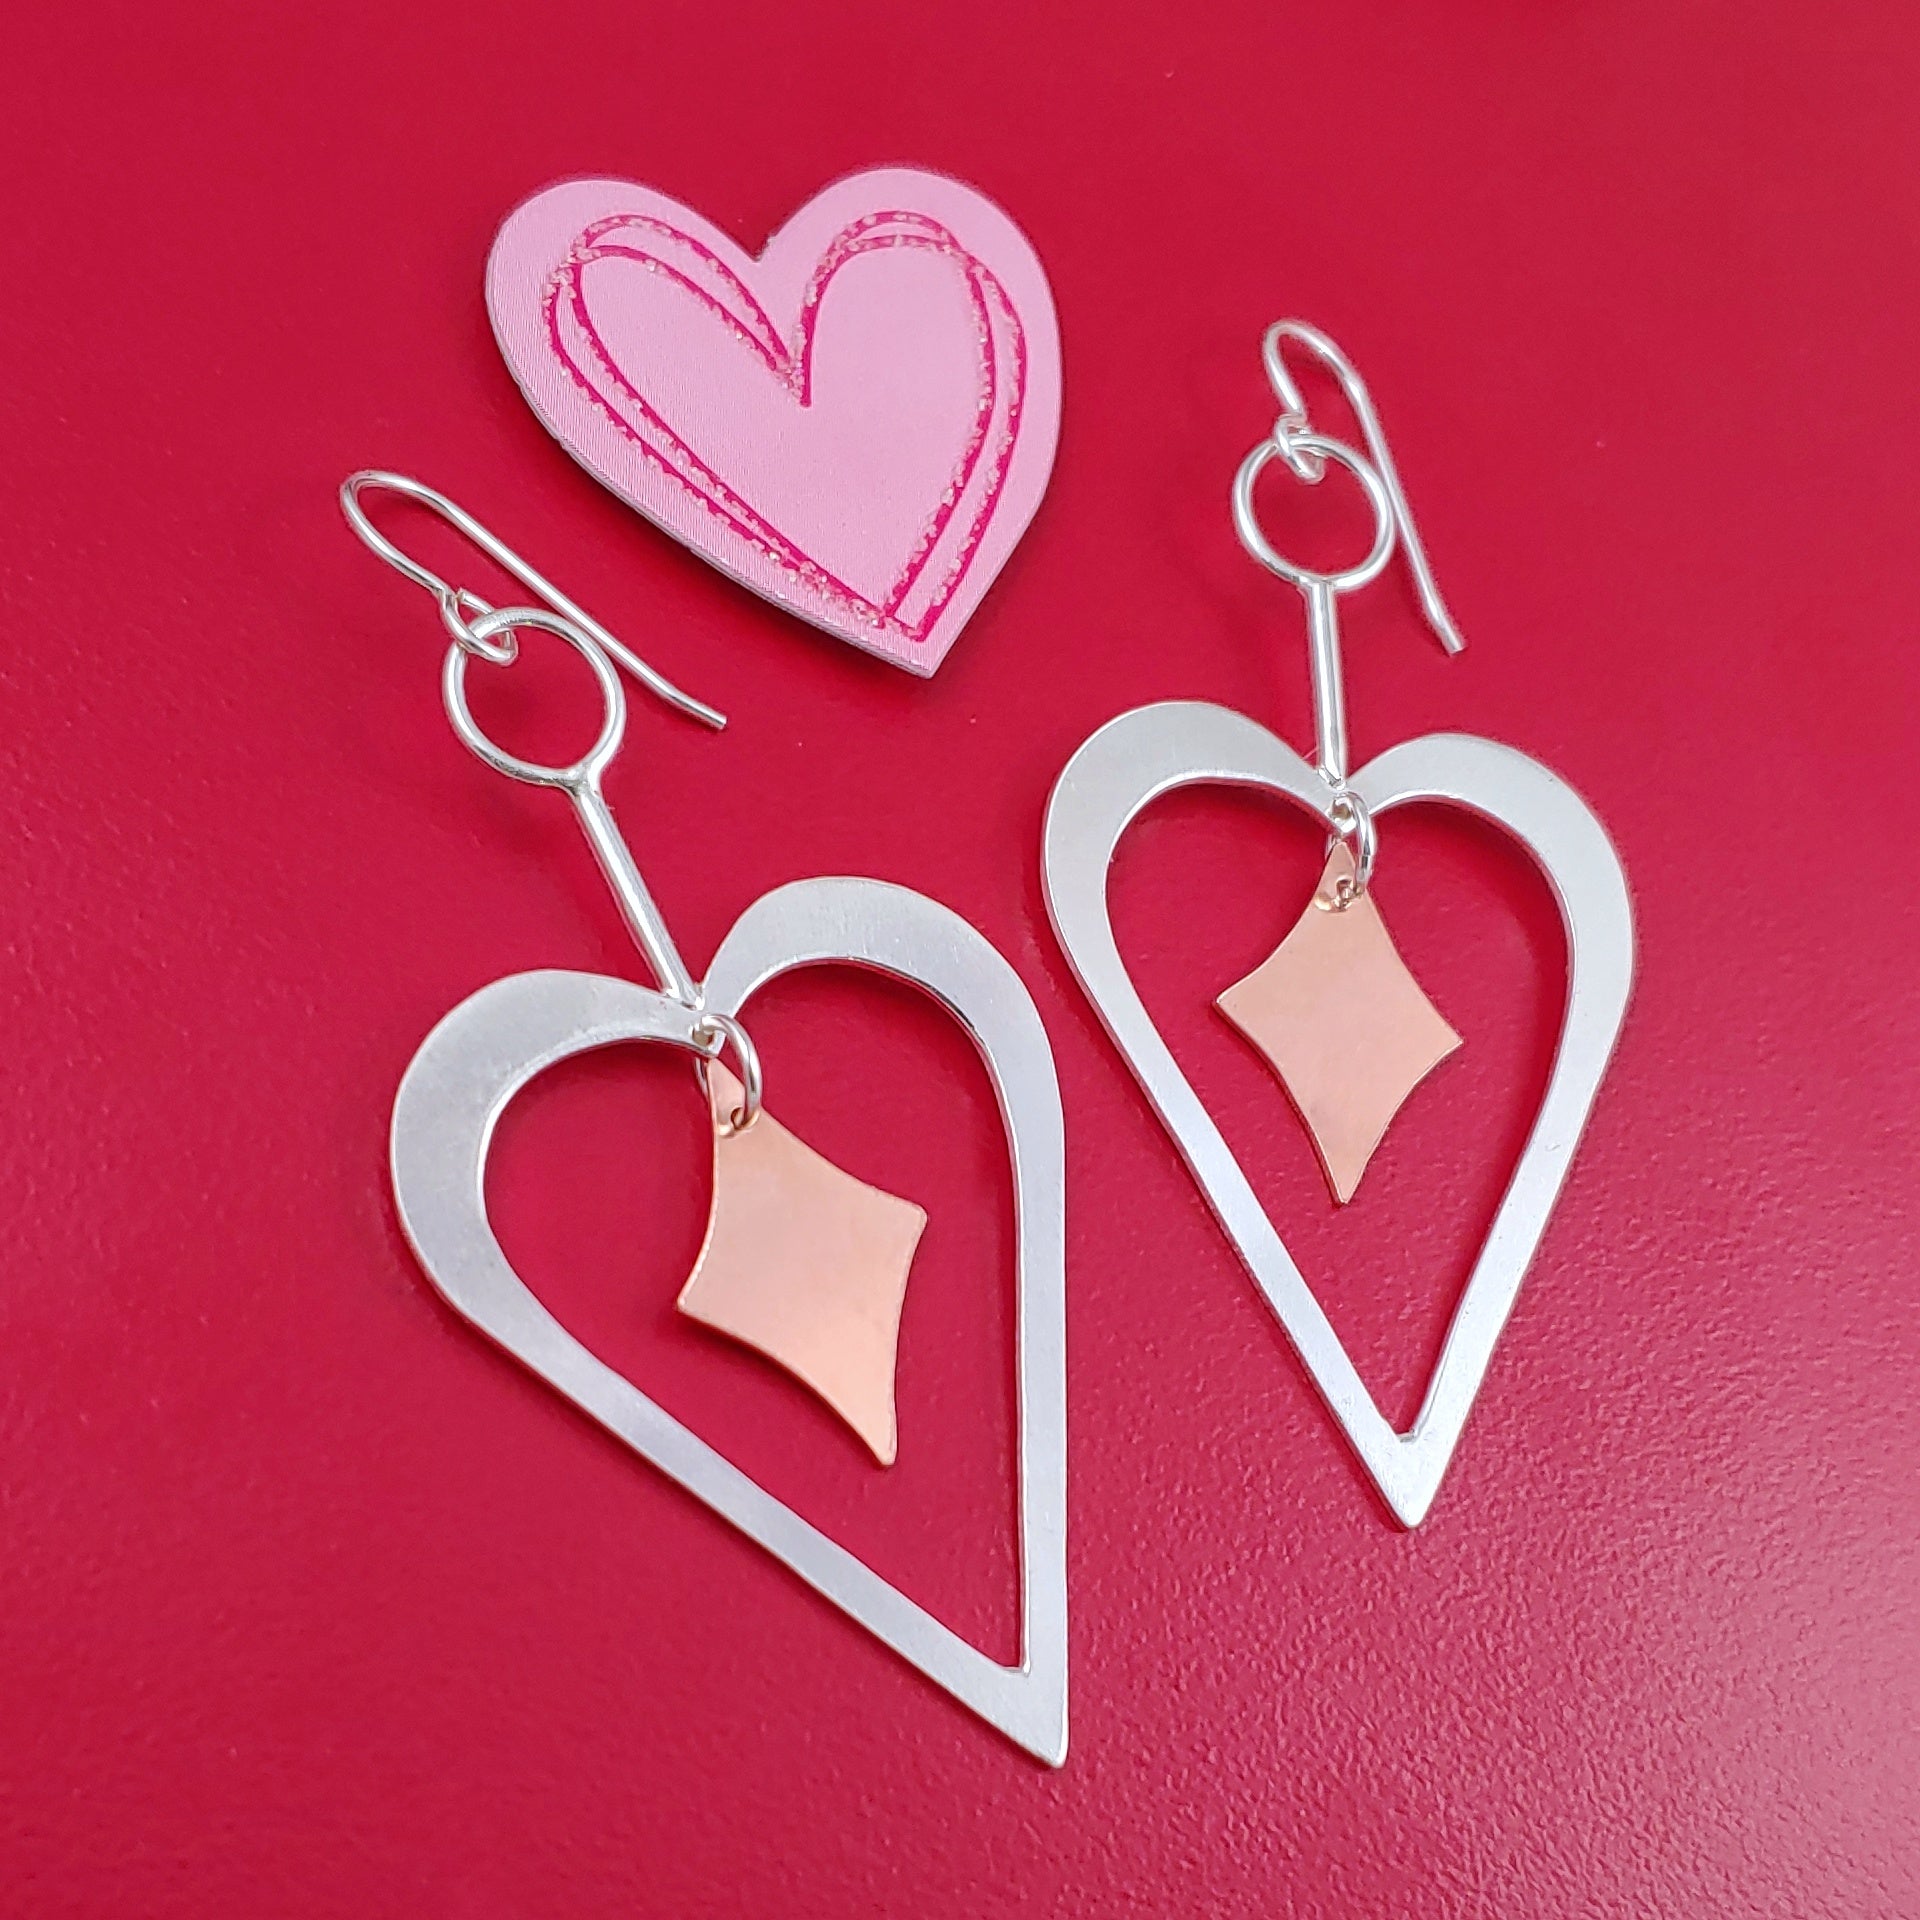 Handmade Sterling silver heart shaped earrings with copper retro diamonds dangling from the center